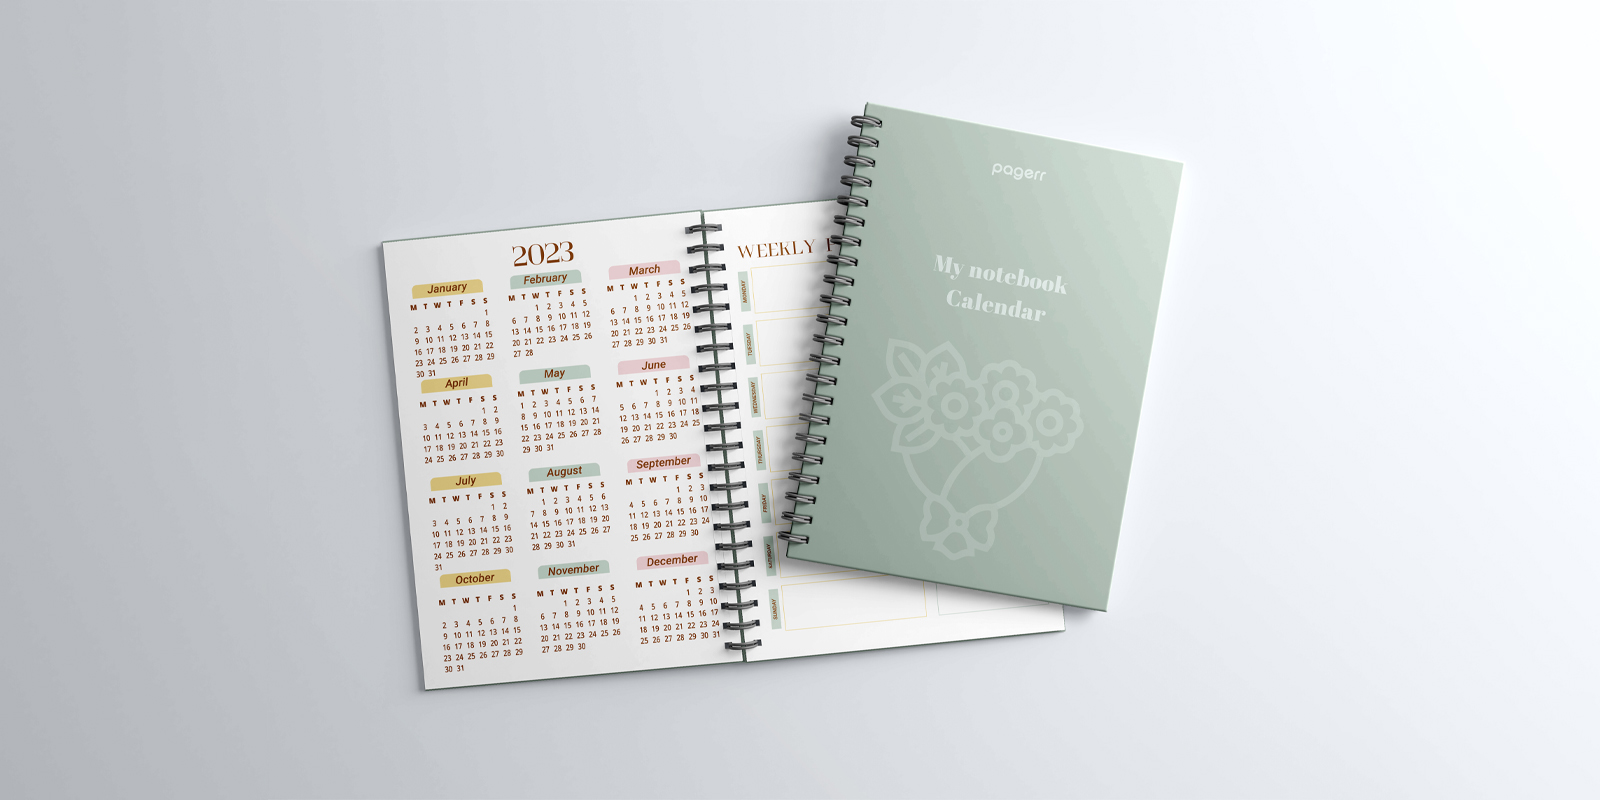 Notebook calendars in Ballarat - Print with Pagerr